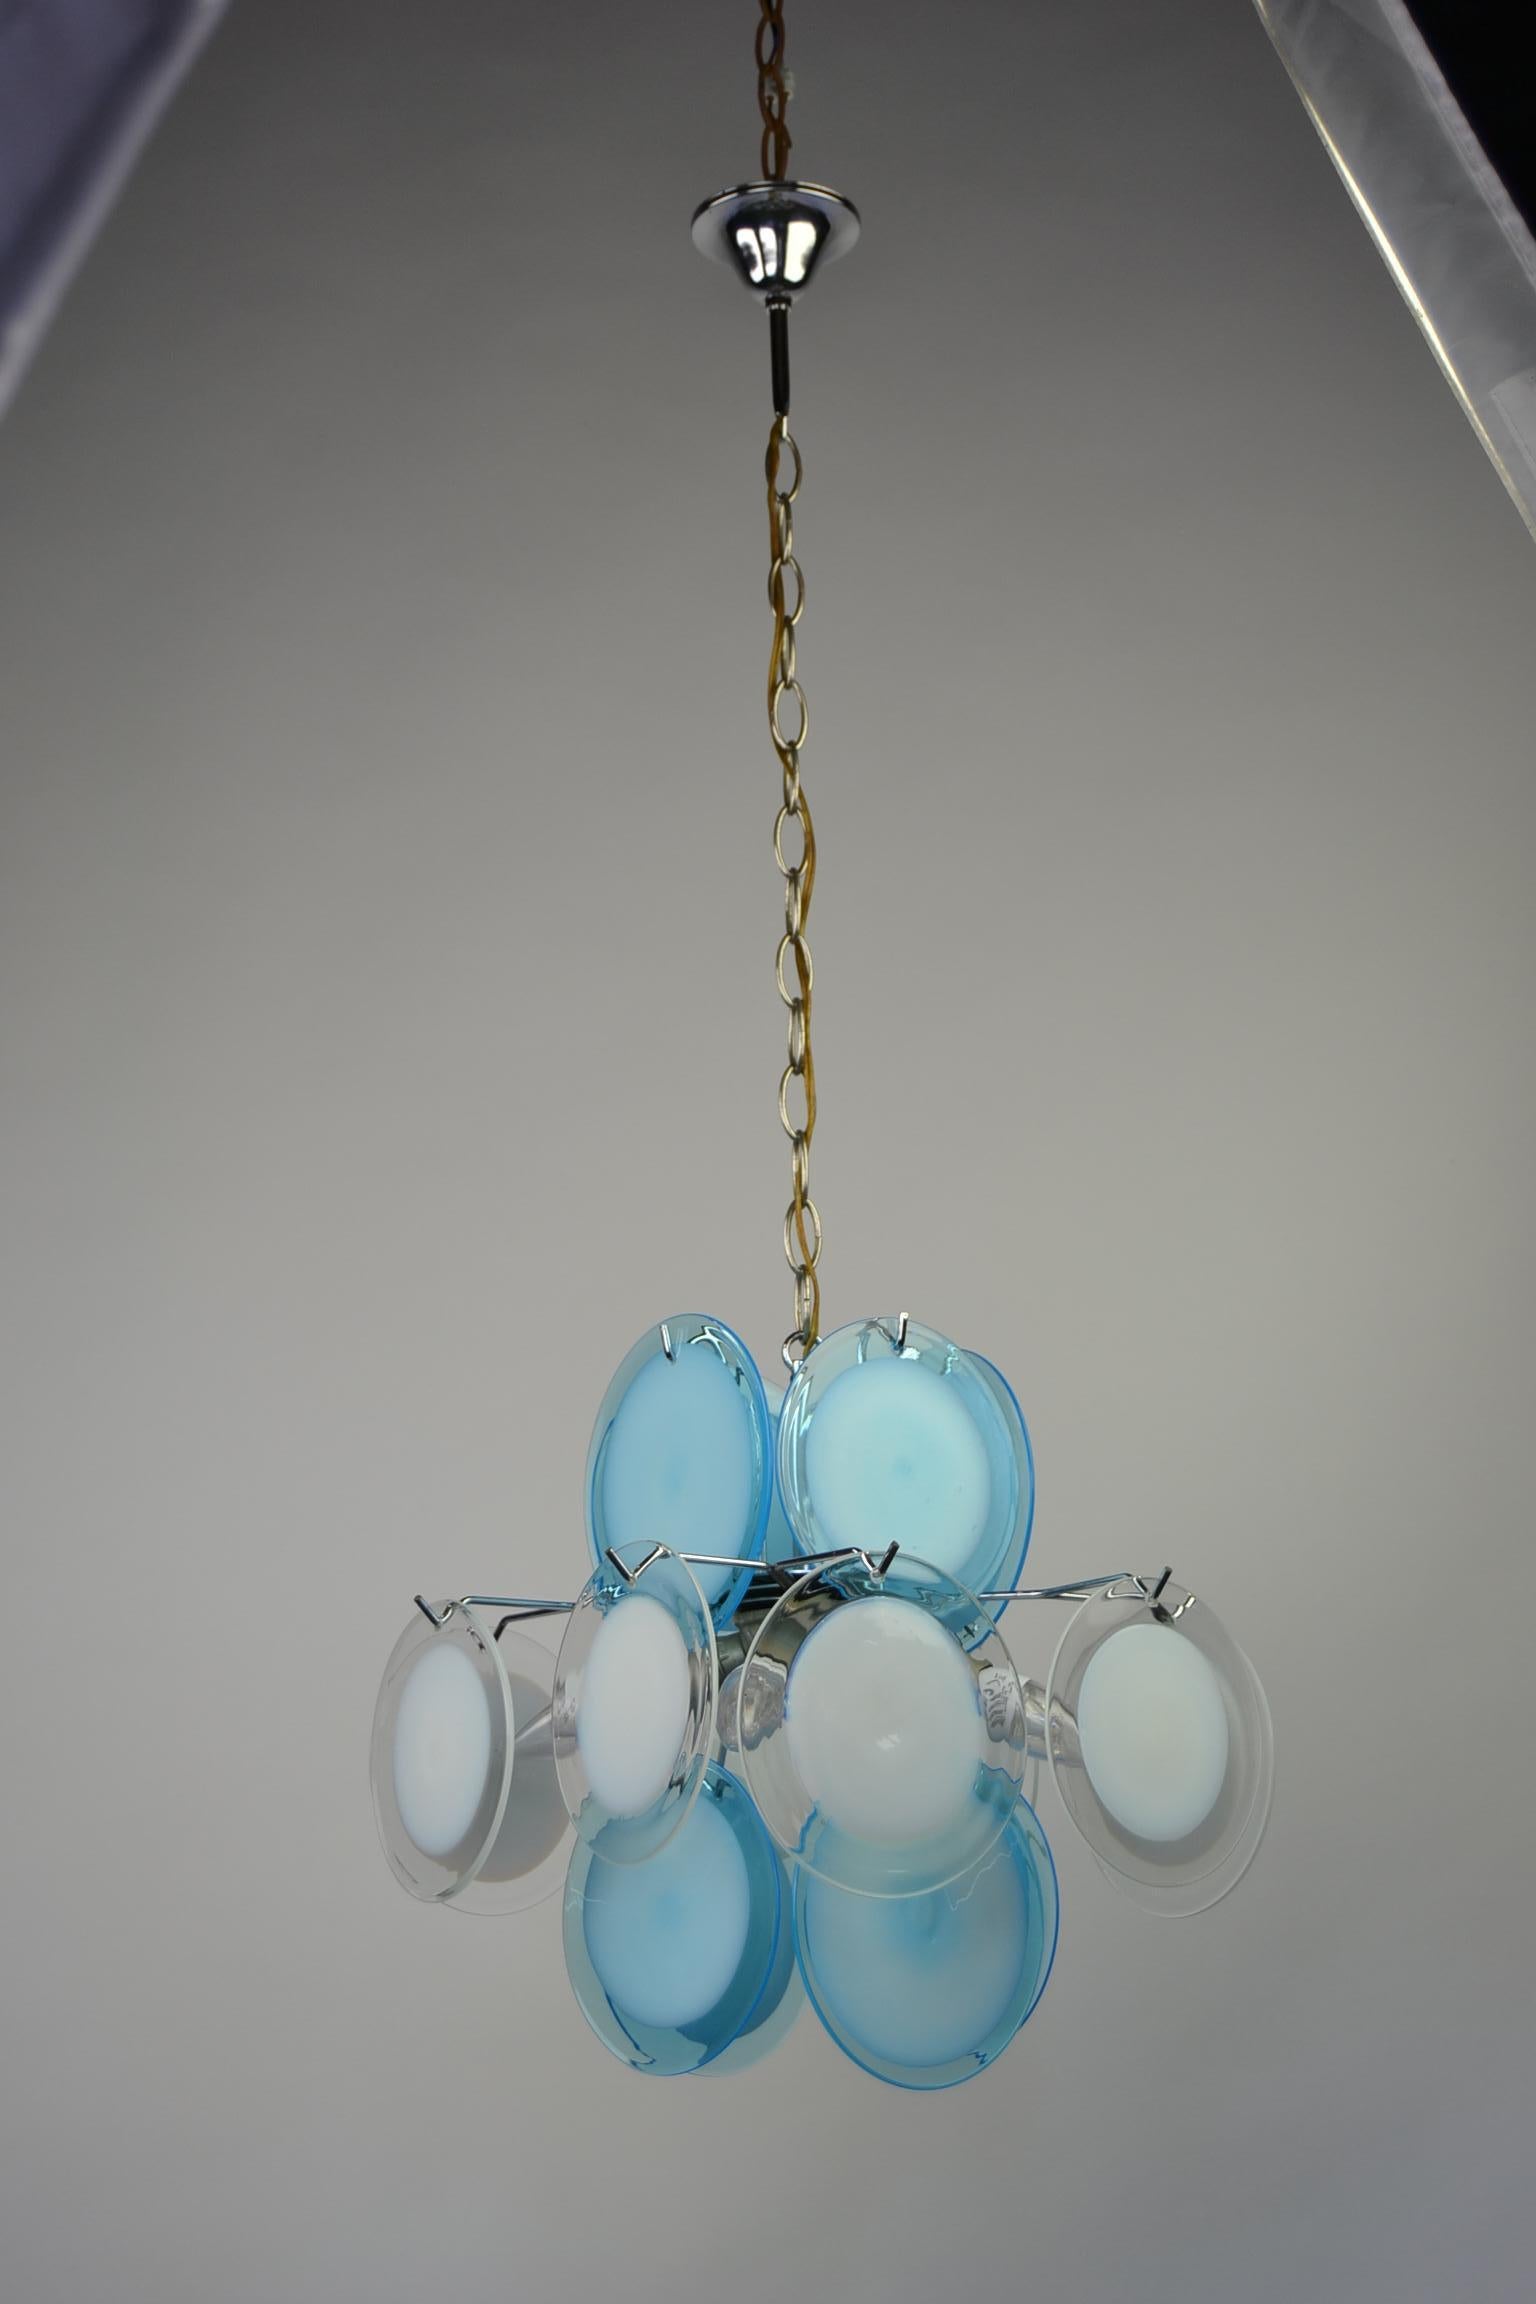 Mid-20th century Vistosi chandelier - Vistosi pendant.
The chrome base has 16 glass Murano discs in the colors blue and white with 4 light points E14 fitting. 
This Italian Lighting dates 1960-1970 and is in good used condition. 
1 glass disc has